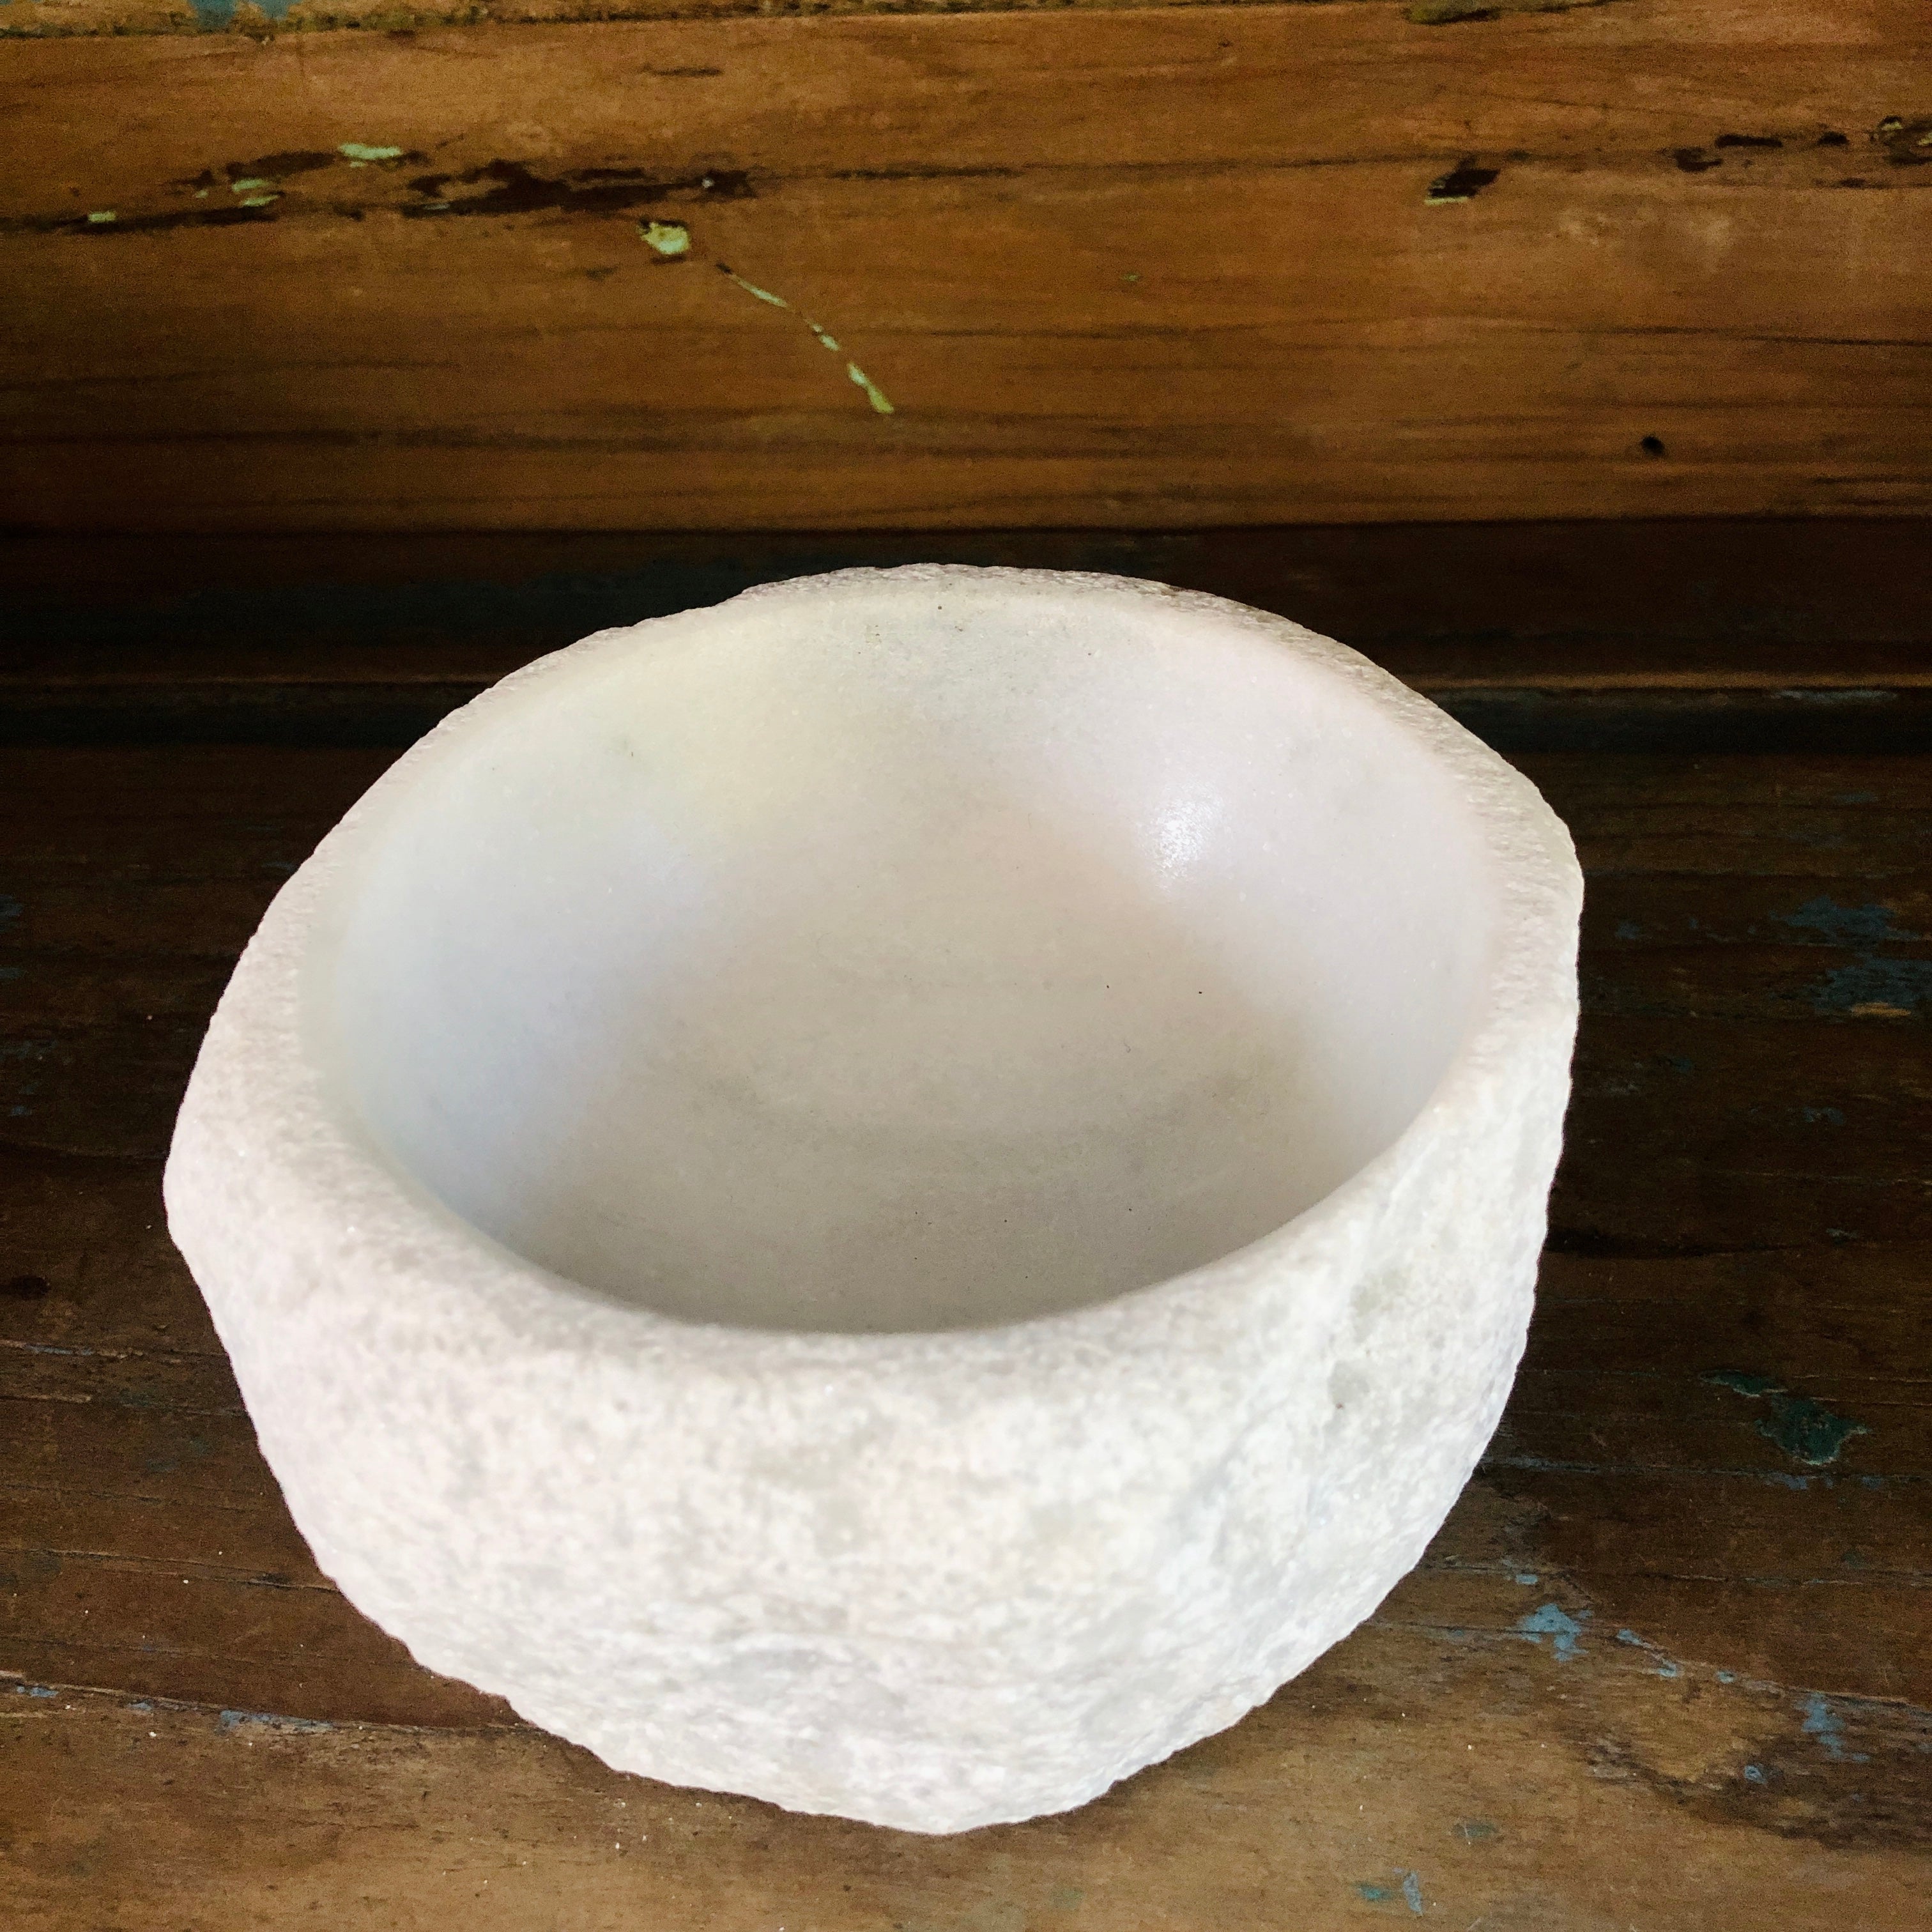 Mortar and Pestle crafted in Mexico